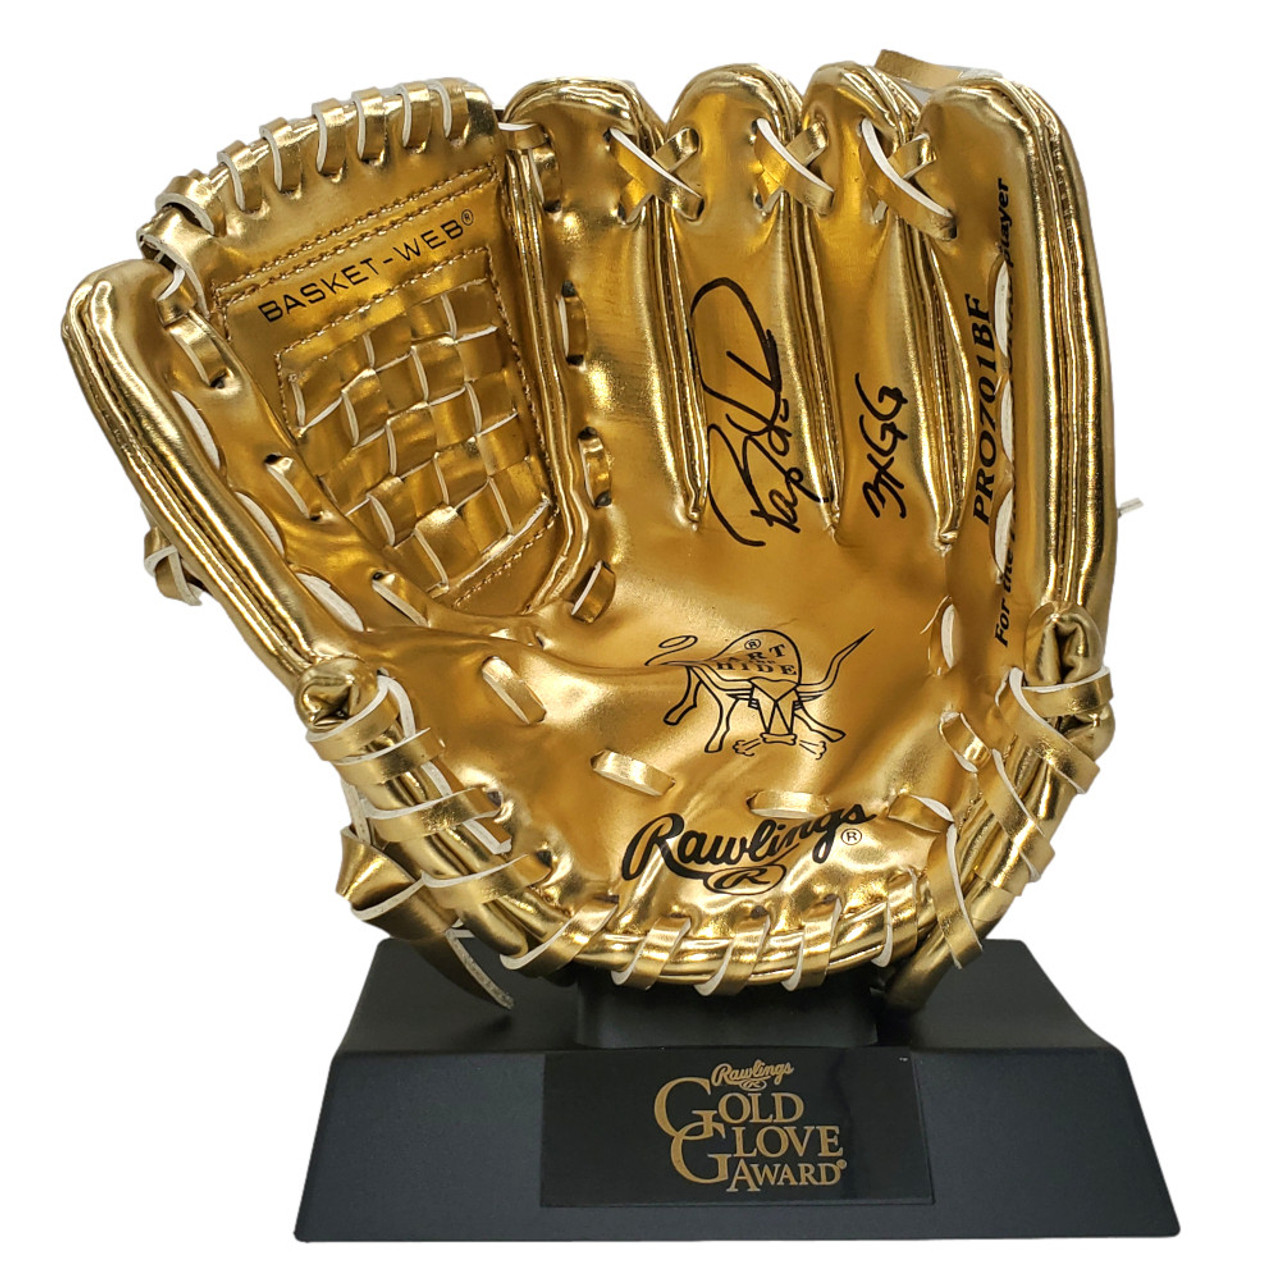 The Rawlings Gold Glove Awards